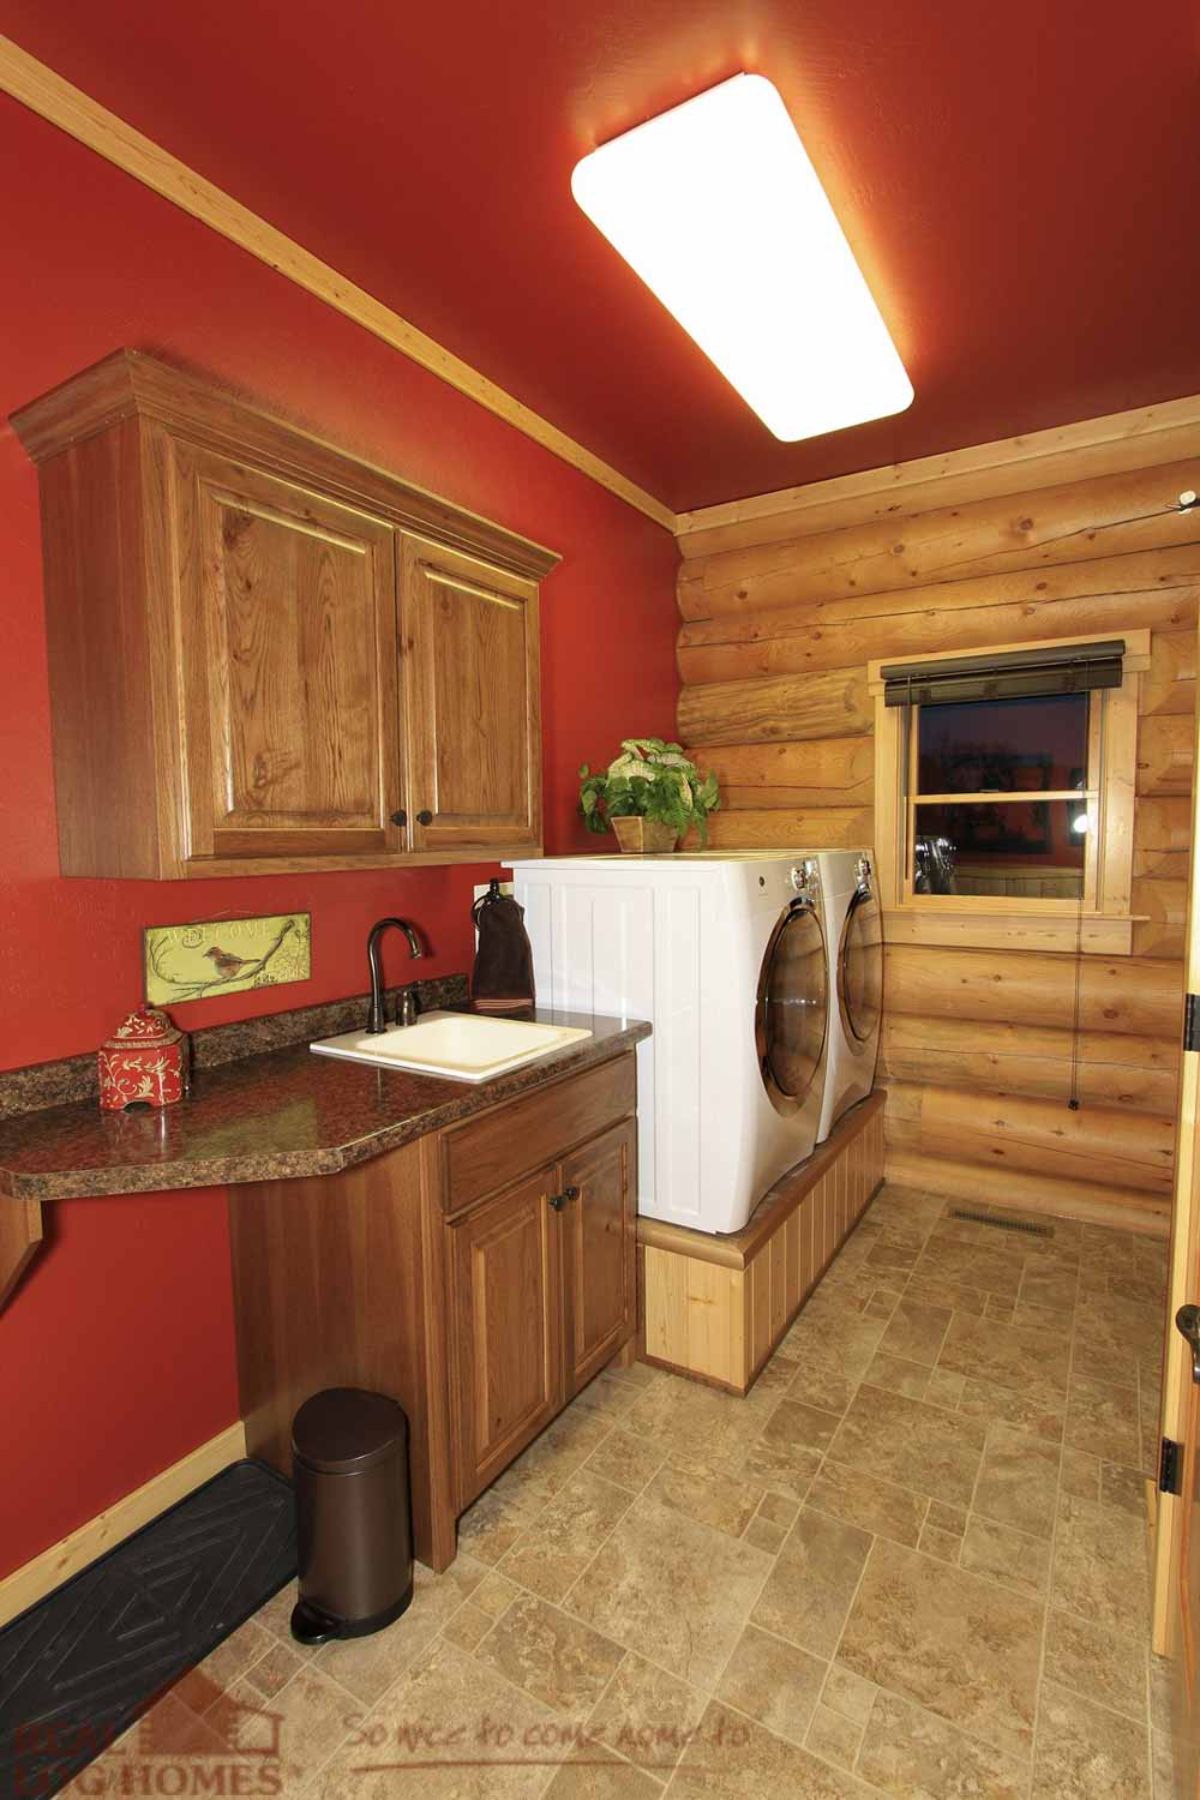 log cabin laundry room with white washer and dryer next to sink and red wall